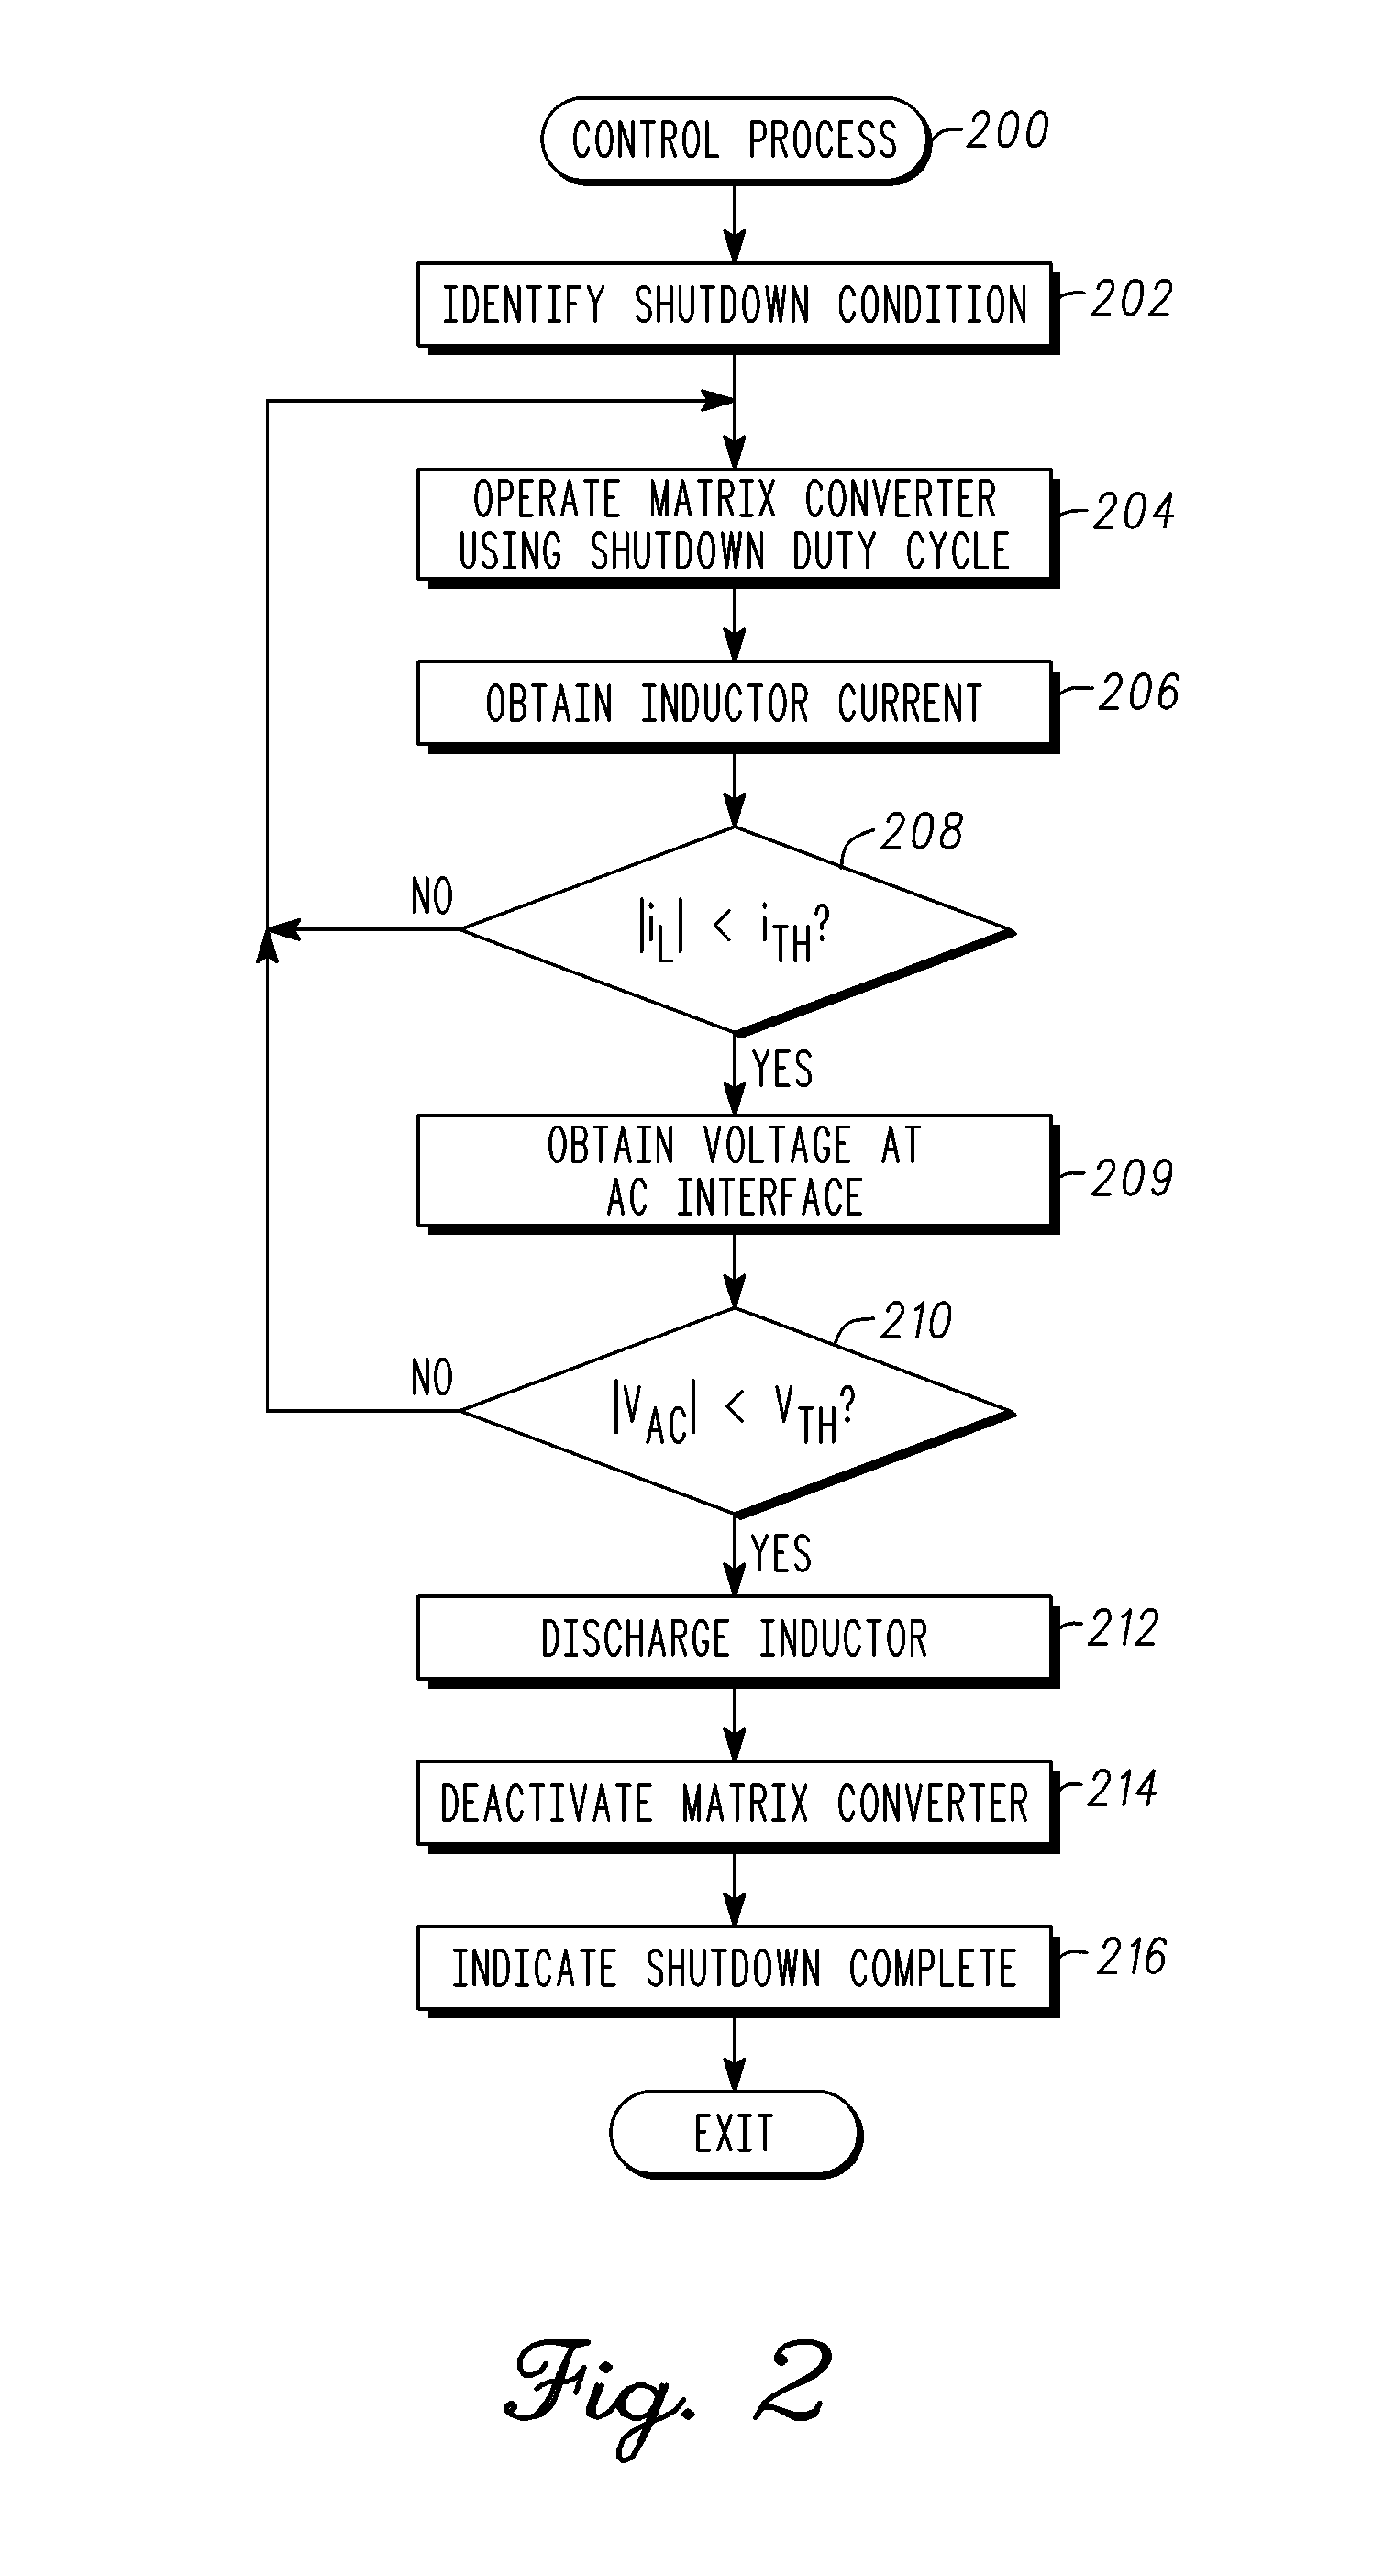 Systems and methods for deactivating a matrix converter